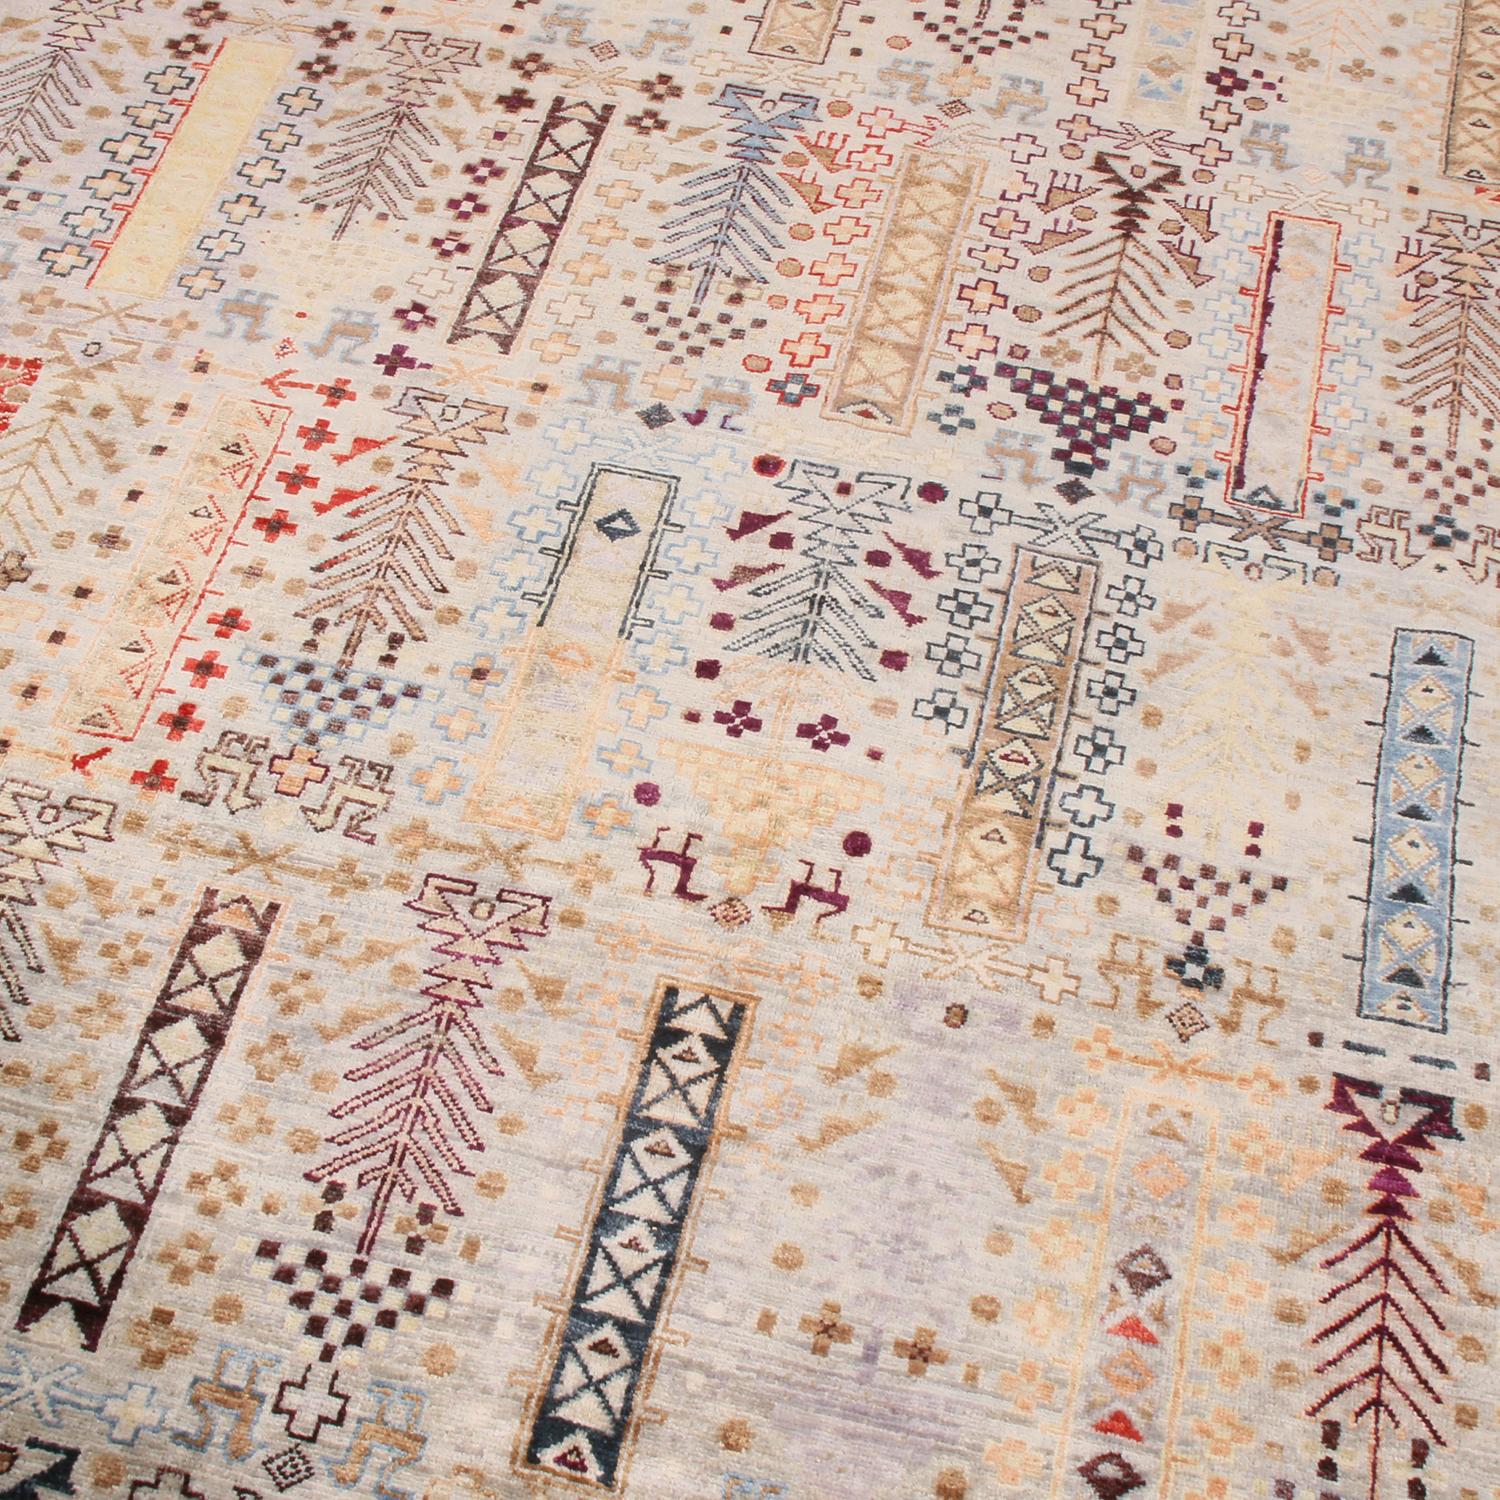 Hand knotted in high-quality wool originating from Afghanistan, this tribal rug hails from Rug & Kilim’s premier Burano collection, enjoying a vivid asymmetrical use of crimson red, blue, and golden-yellow hues complementing the agricultural moods